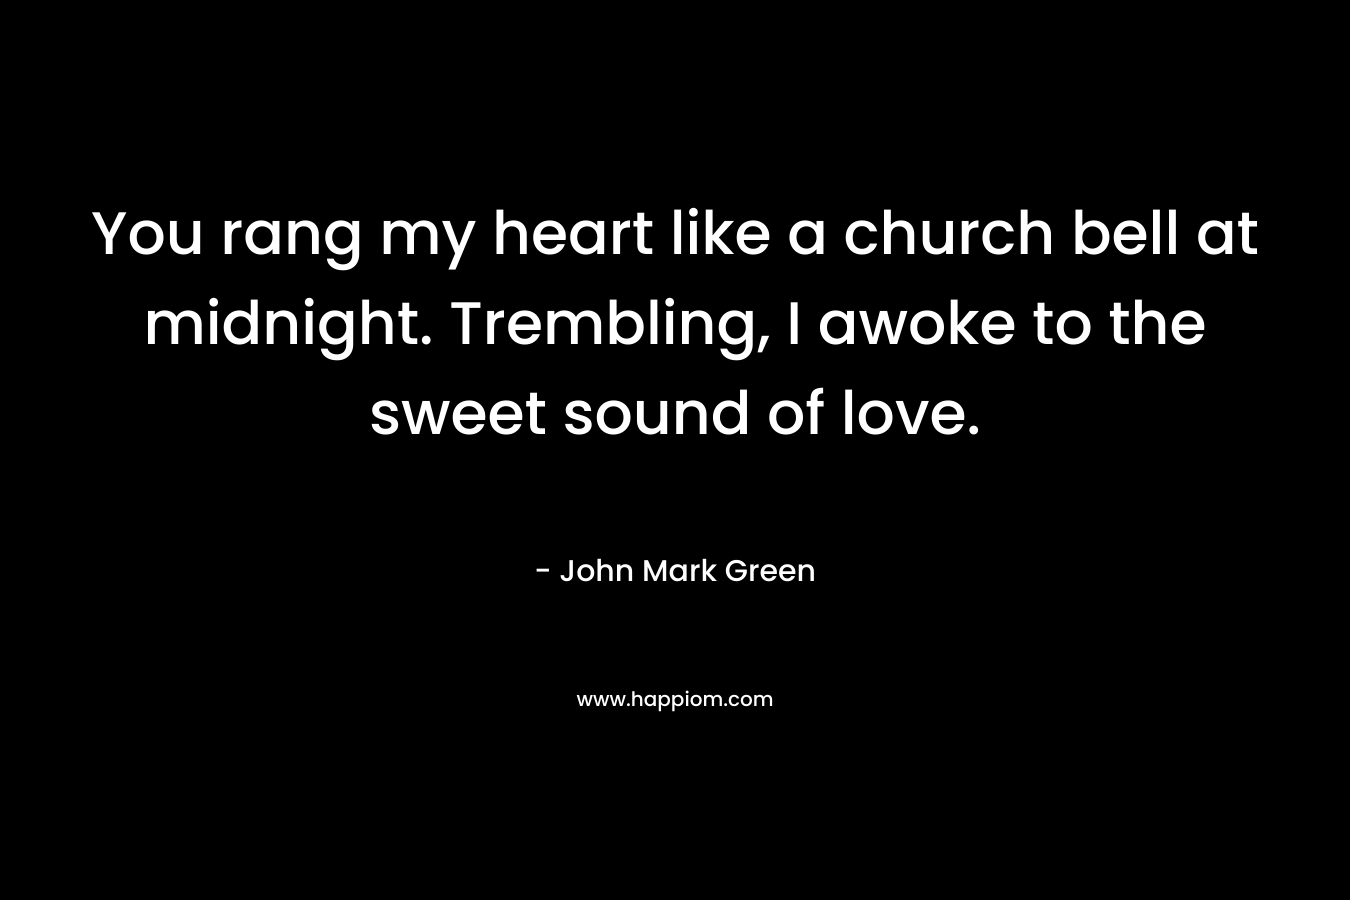 You rang my heart like a church bell at midnight. Trembling, I awoke to the sweet sound of love. – John Mark Green